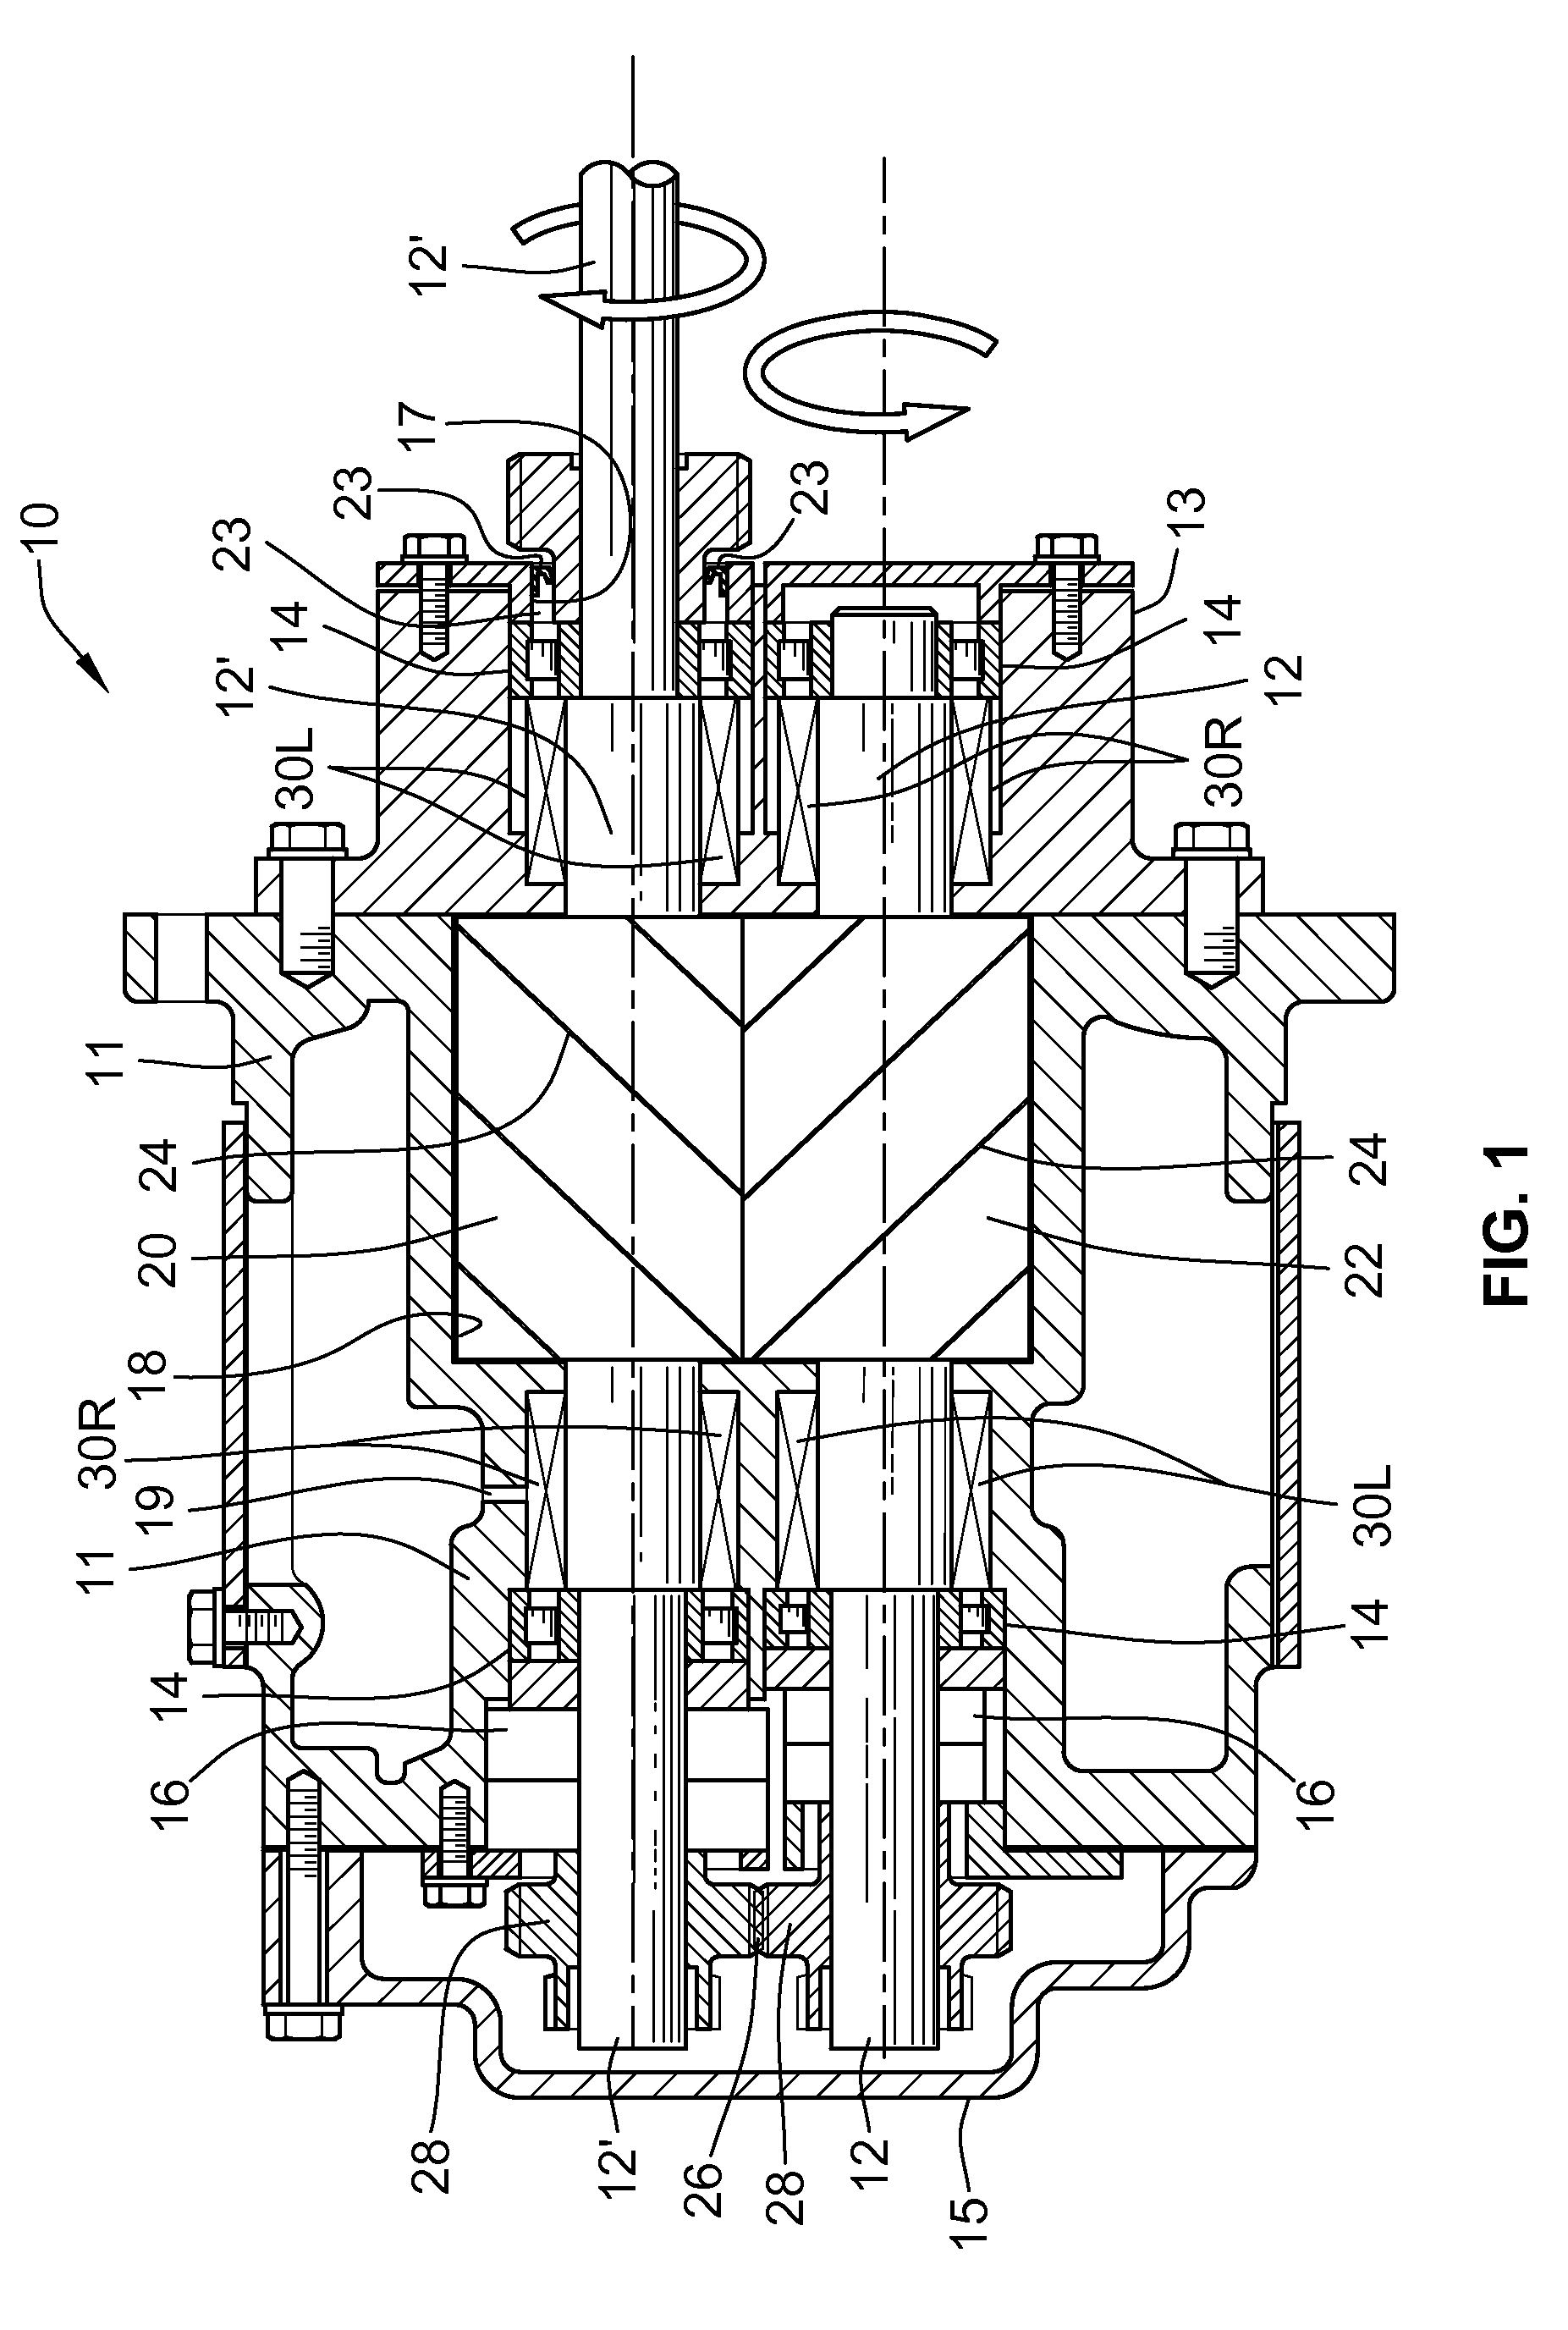 Seal for oil-free rotary displacement compressor